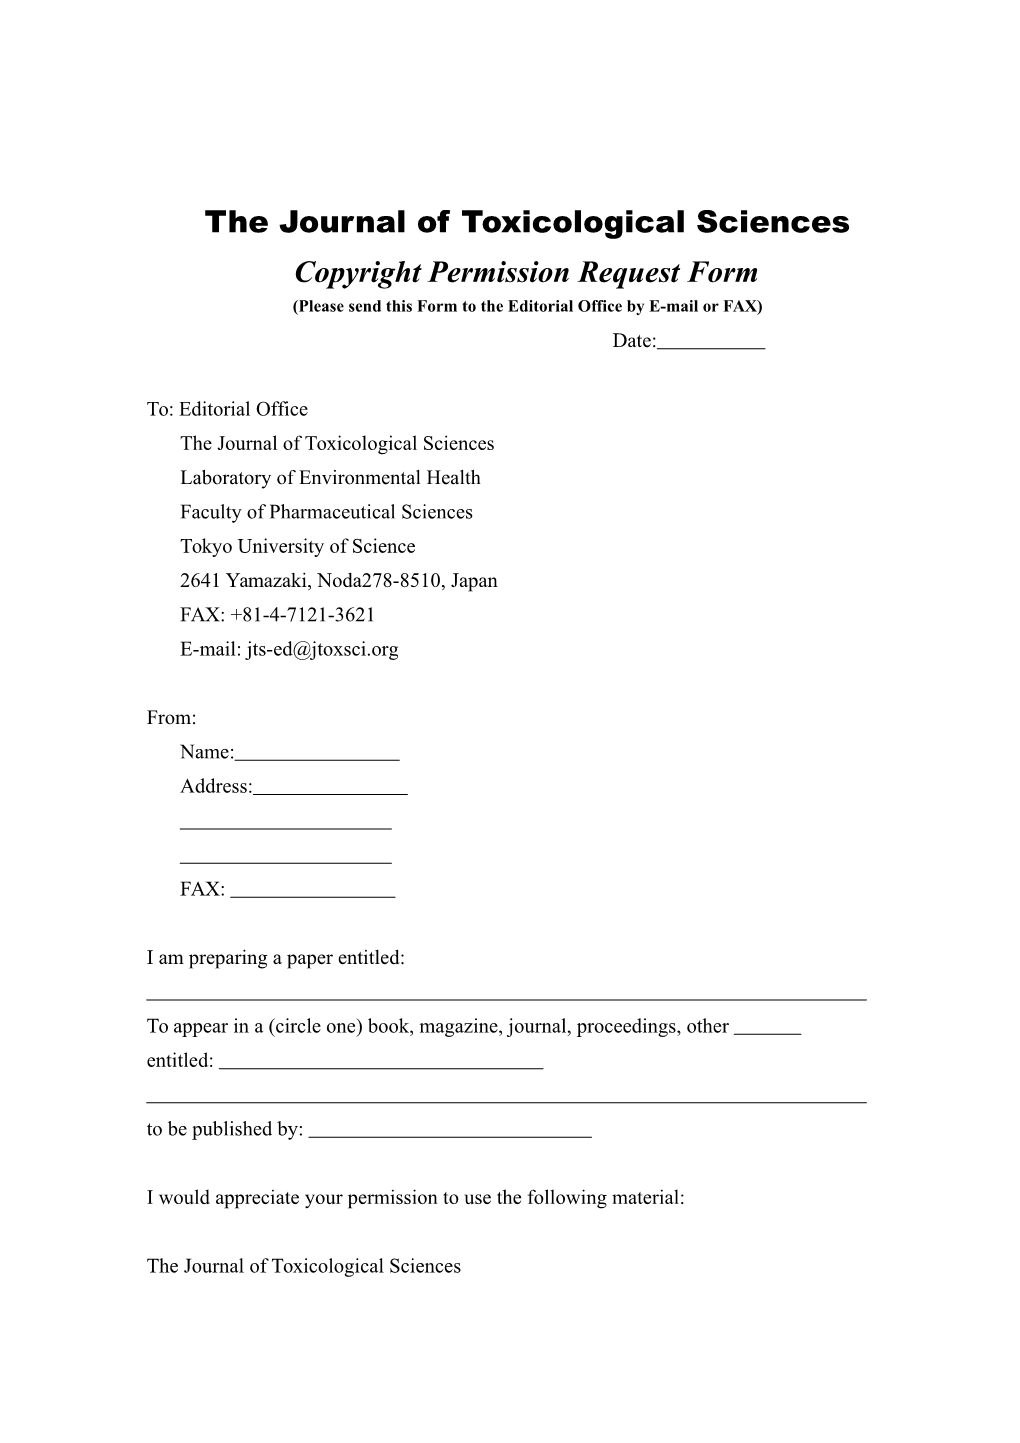 The Journal of Toxicological Sciences